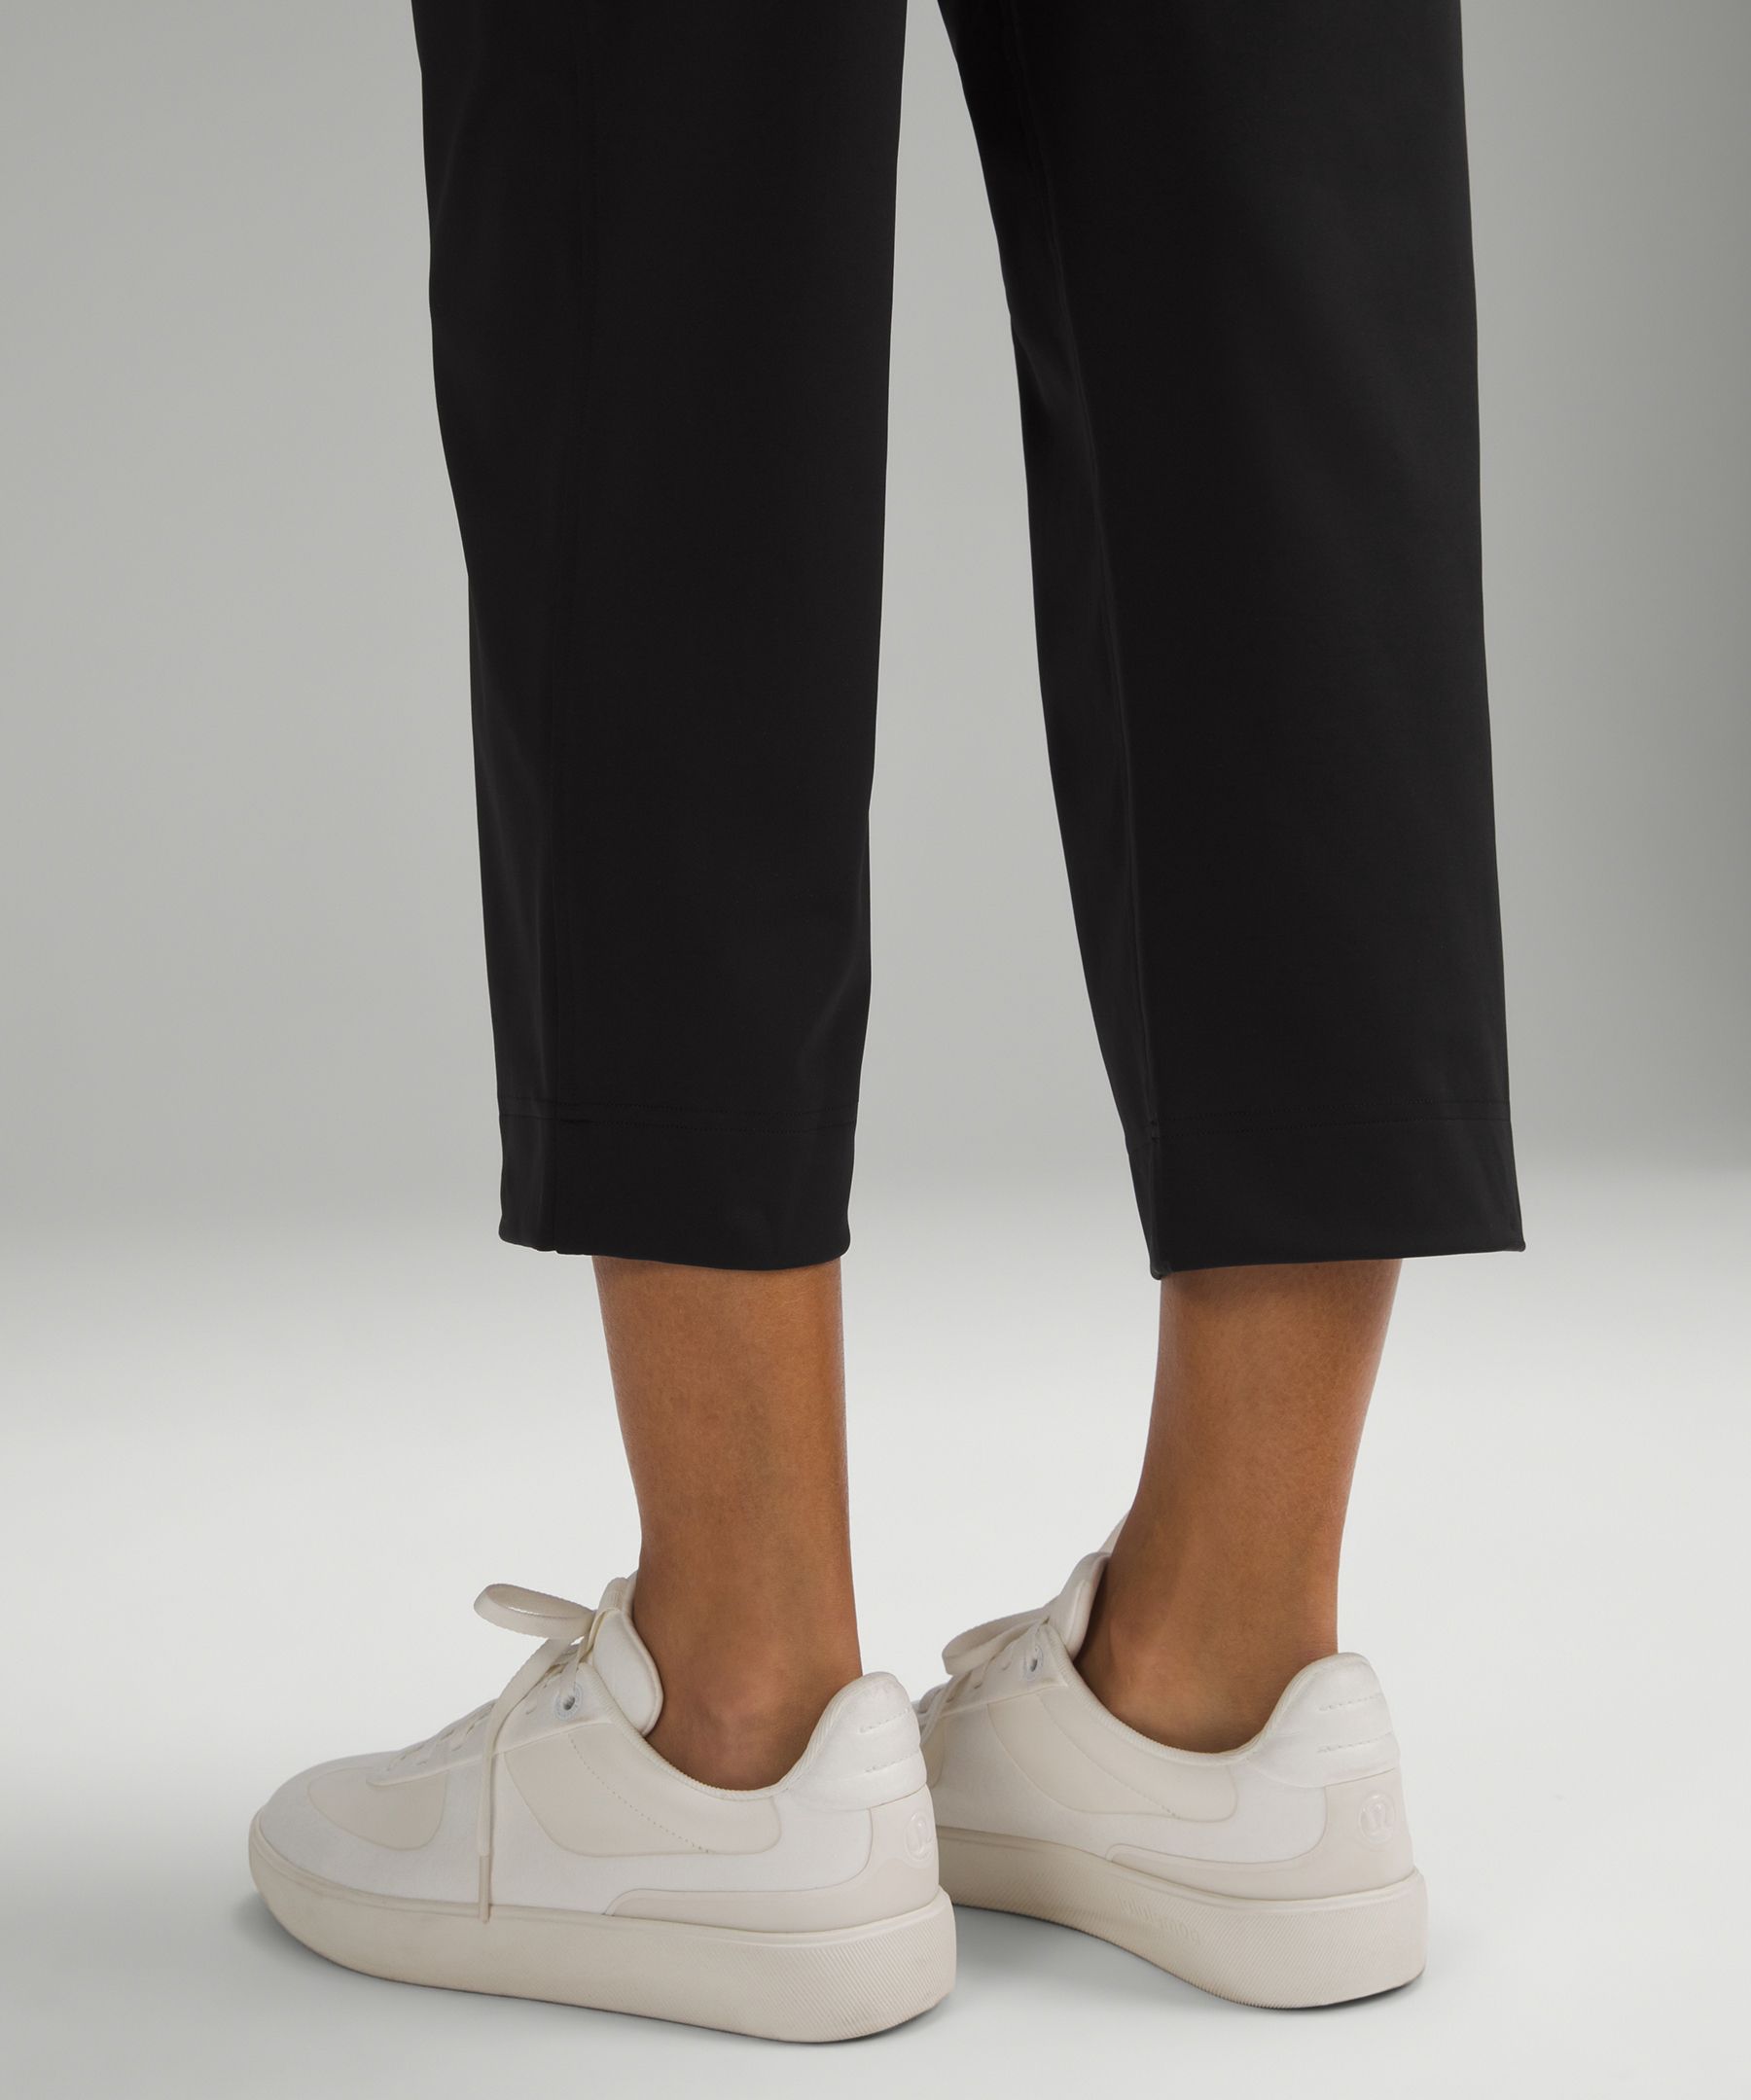 Lululemon athletica Ribbed Softstreme Mid-Rise Wide-Leg Cropped Pant 25, Women's Capris